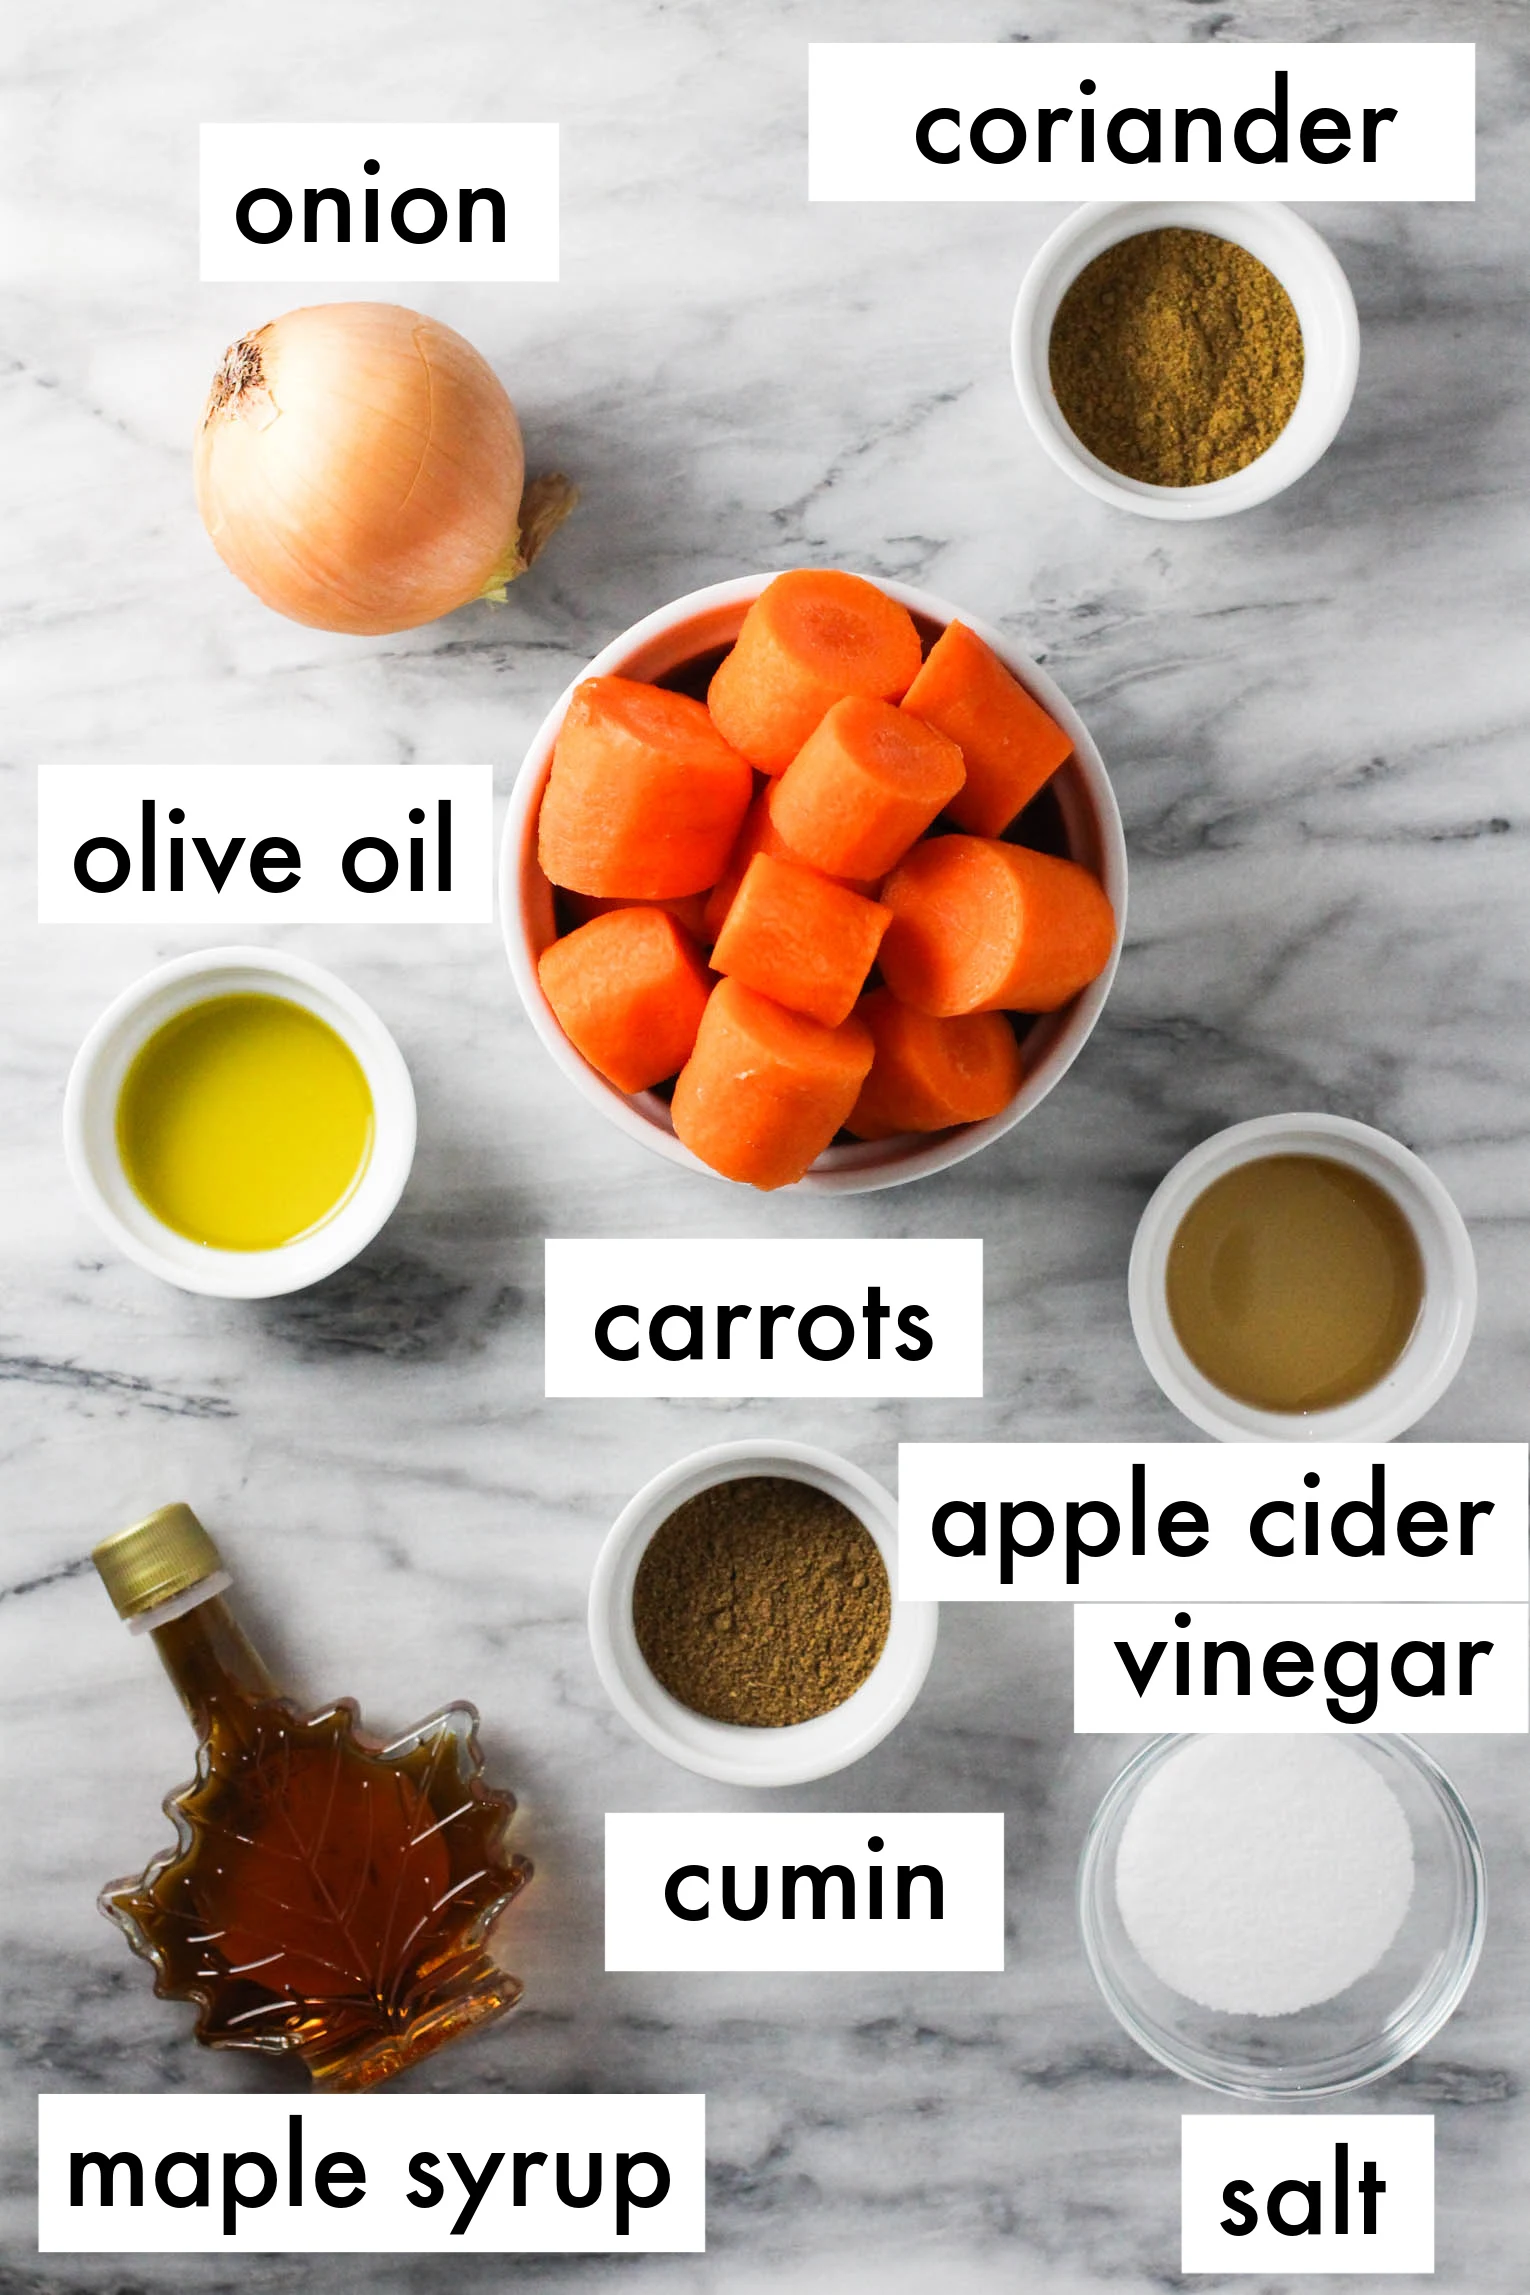 Carrot mash ingredients on marble background. The ingredients are labeled as follows: onion, coriander, olive oil, carrots, apple cider vinegar, cumin, maple syrup, salt.